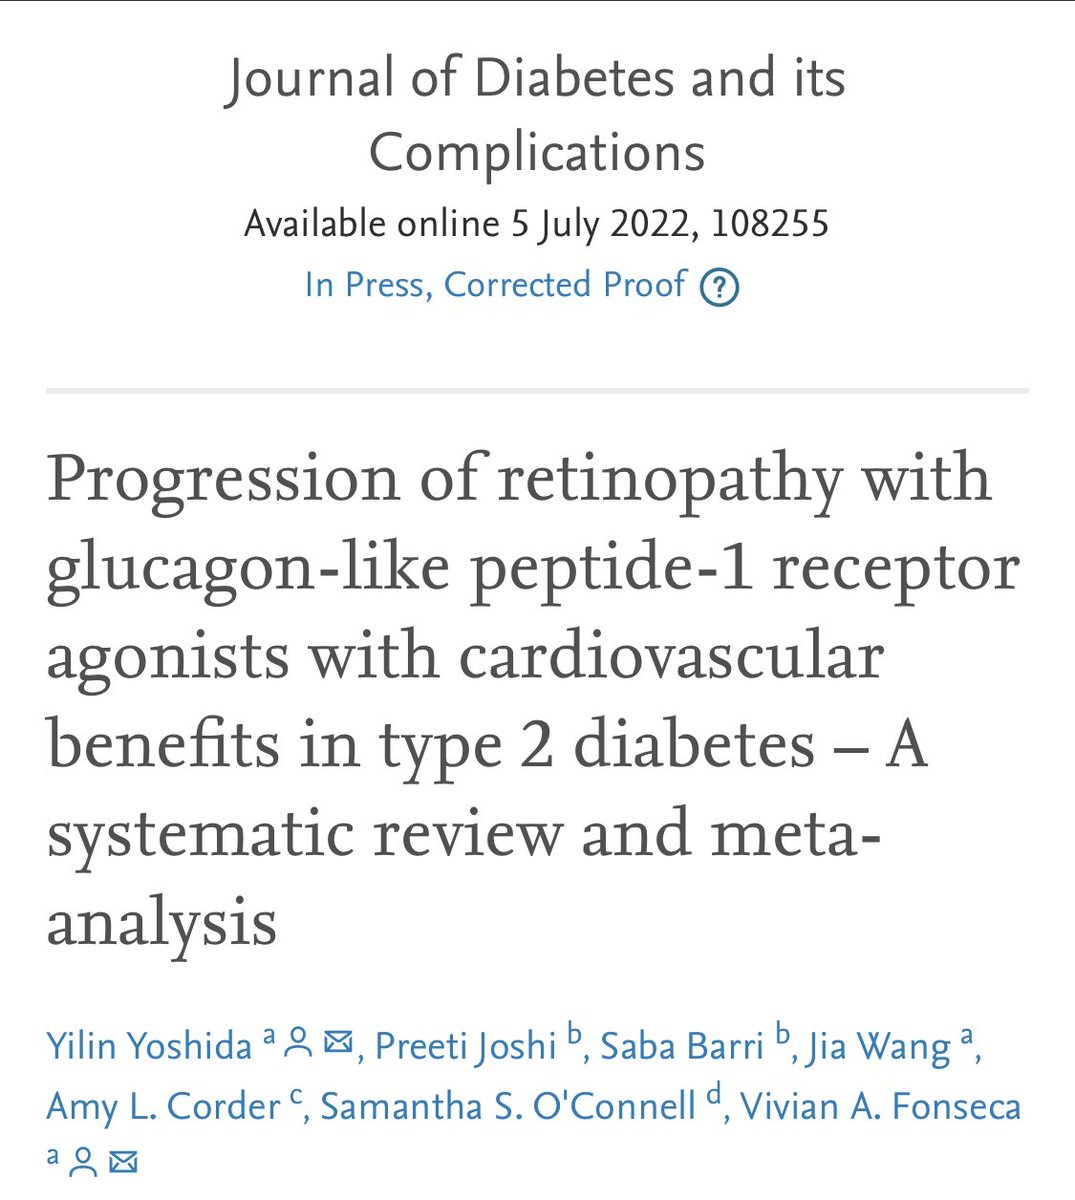 Progression retinopathy with GLP-1RAs 🔹Meta-analysis 13 RCTs incl. CVOTs 🔸 significant ⬆️ risk in RCTs >52 weeks (1.2, 1.00–1.43) 🔹 not significant in T2DM ≥10 years (1.19, 0.99–1.42) or from multiple countries (1.2, 0.99–1.46)🤔 🔸needs more FOCUS 😉 sciencedirect.com/science/articl…